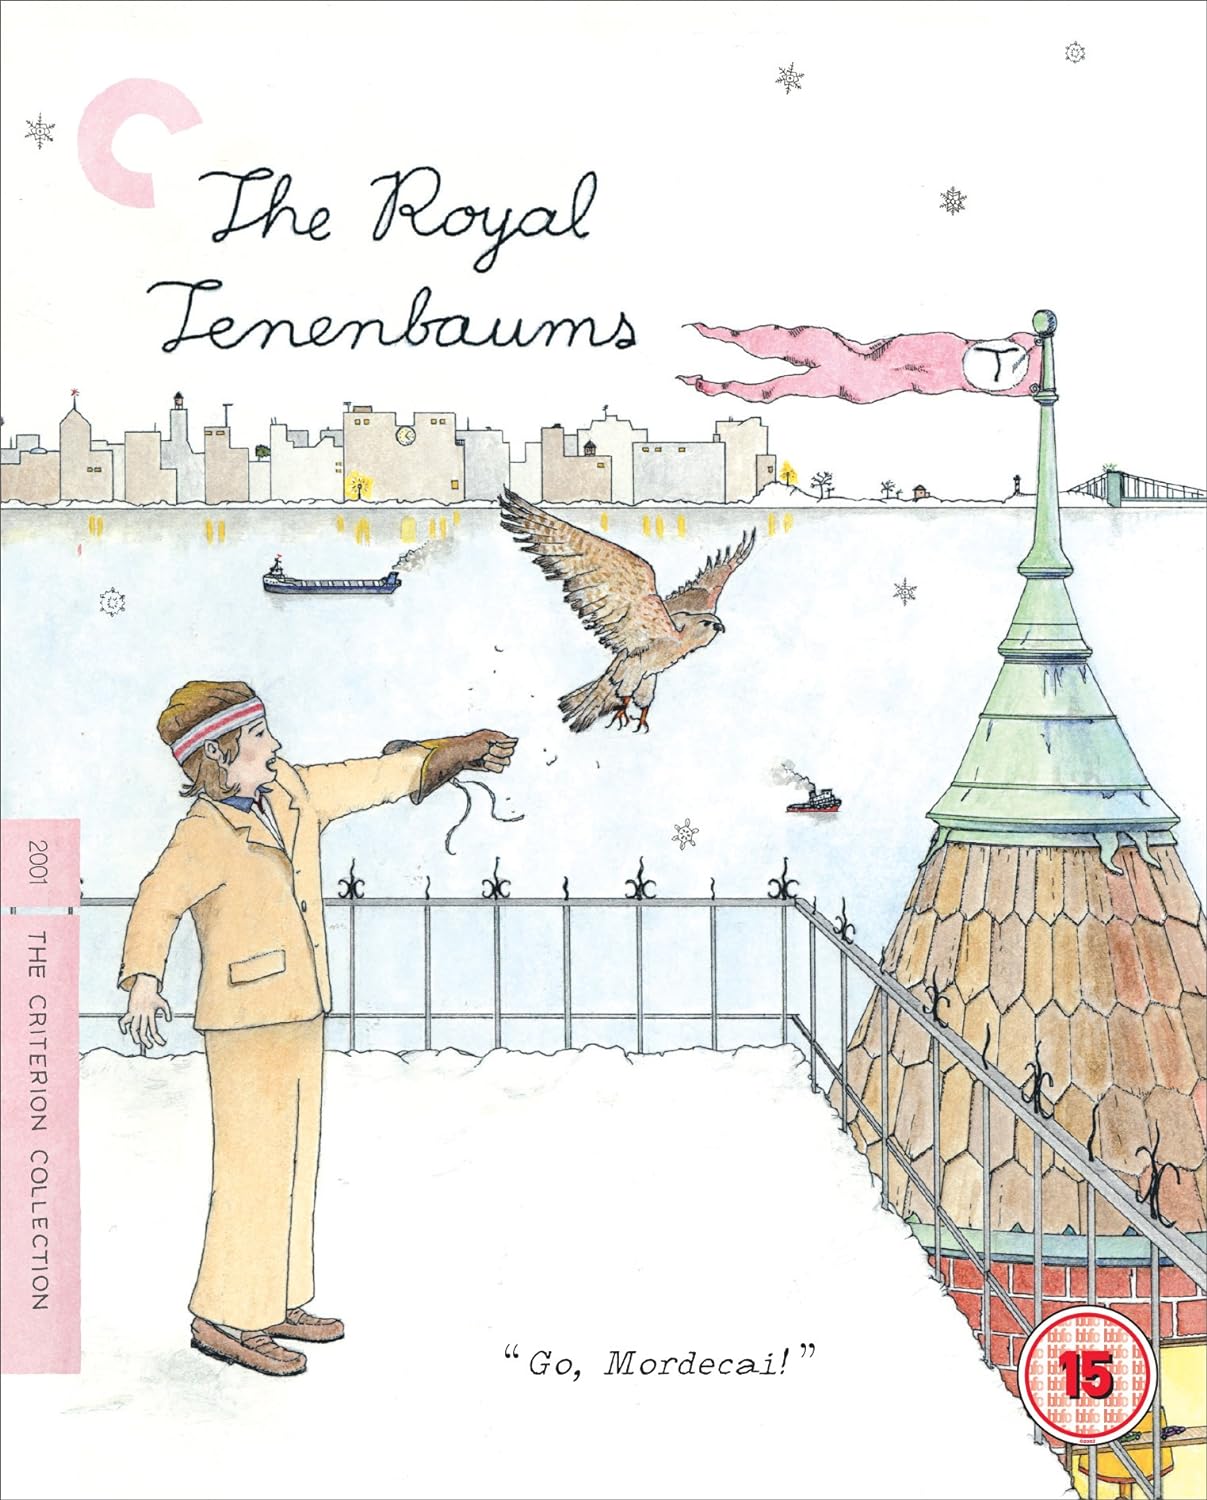 The Royal Tenenbaums - Criterion Collection (Blu-ray)